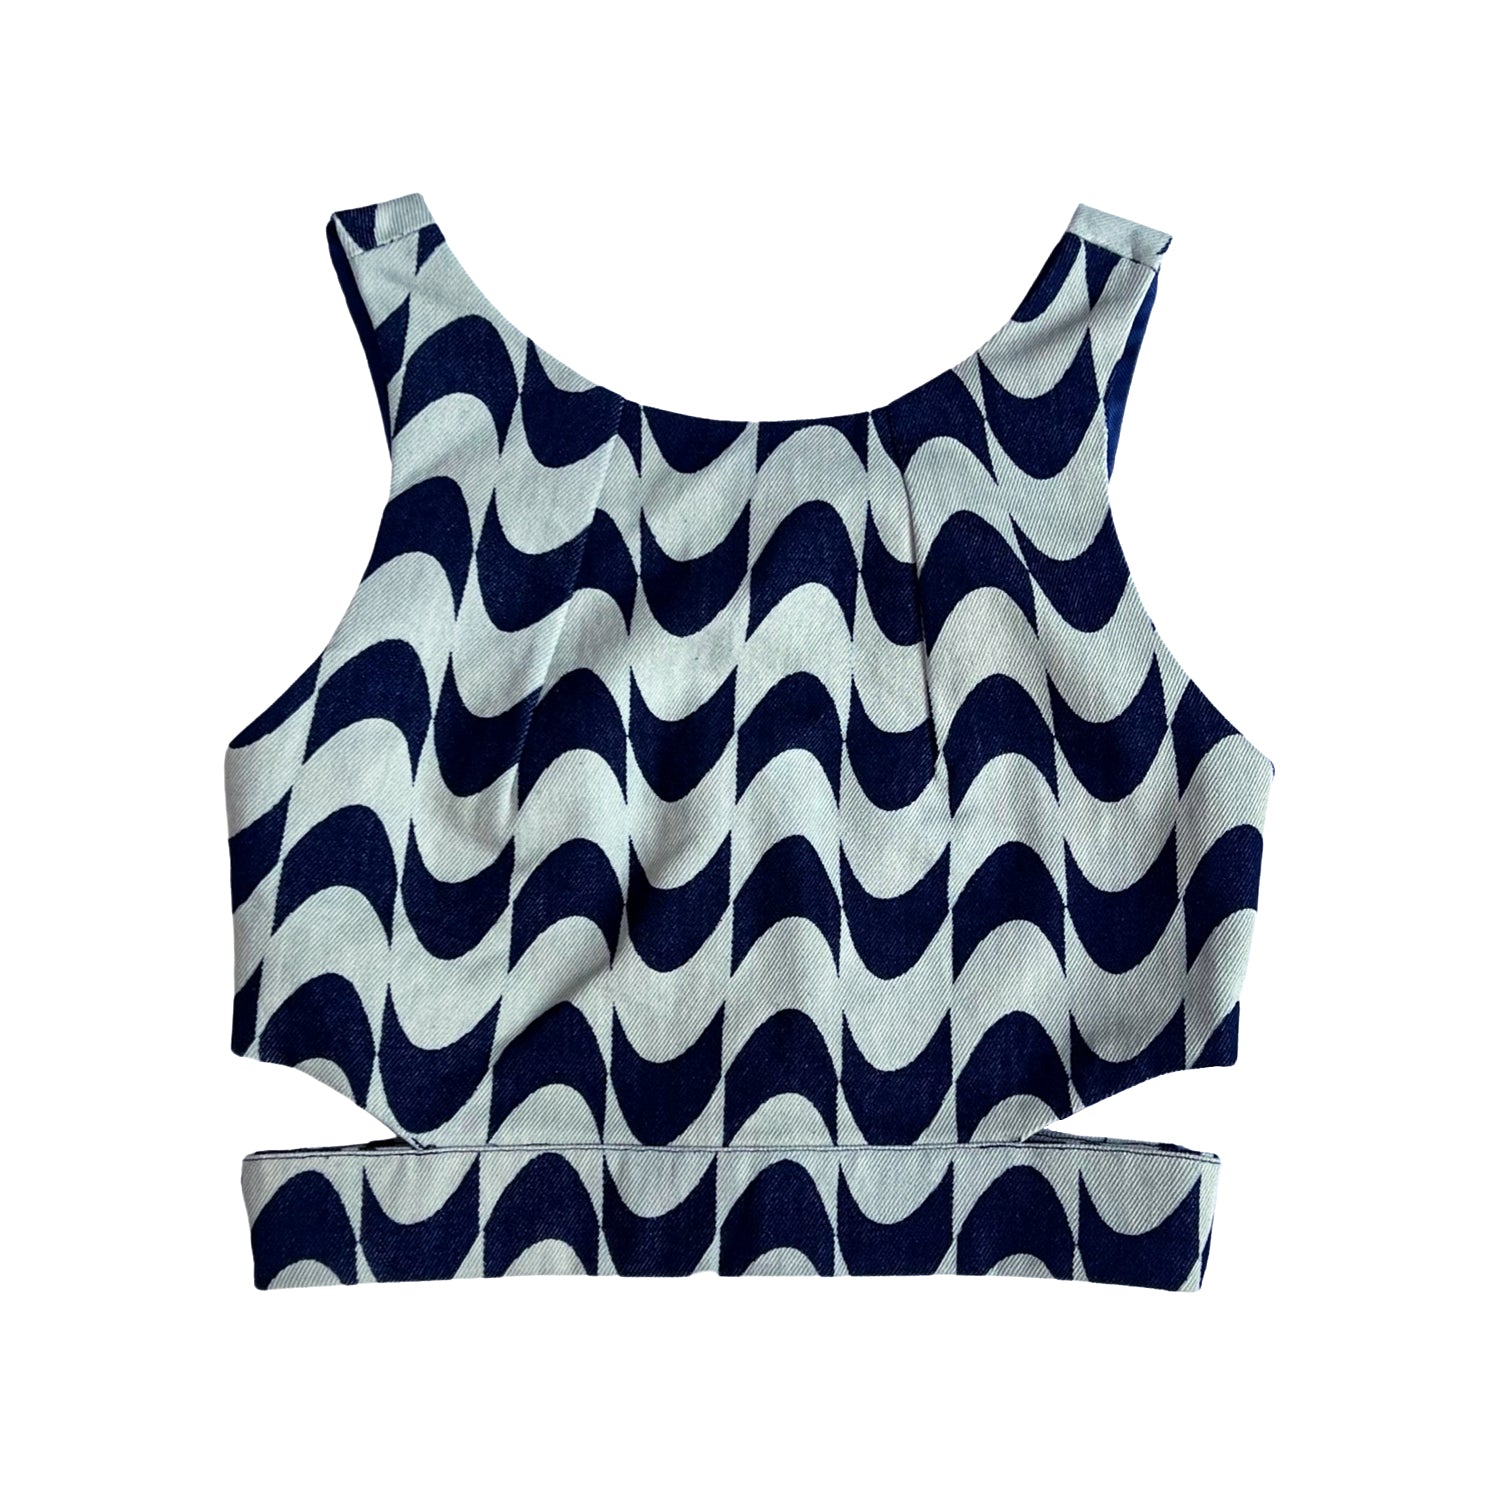 Printed Denim Crop Top with Cut Outs in Blue